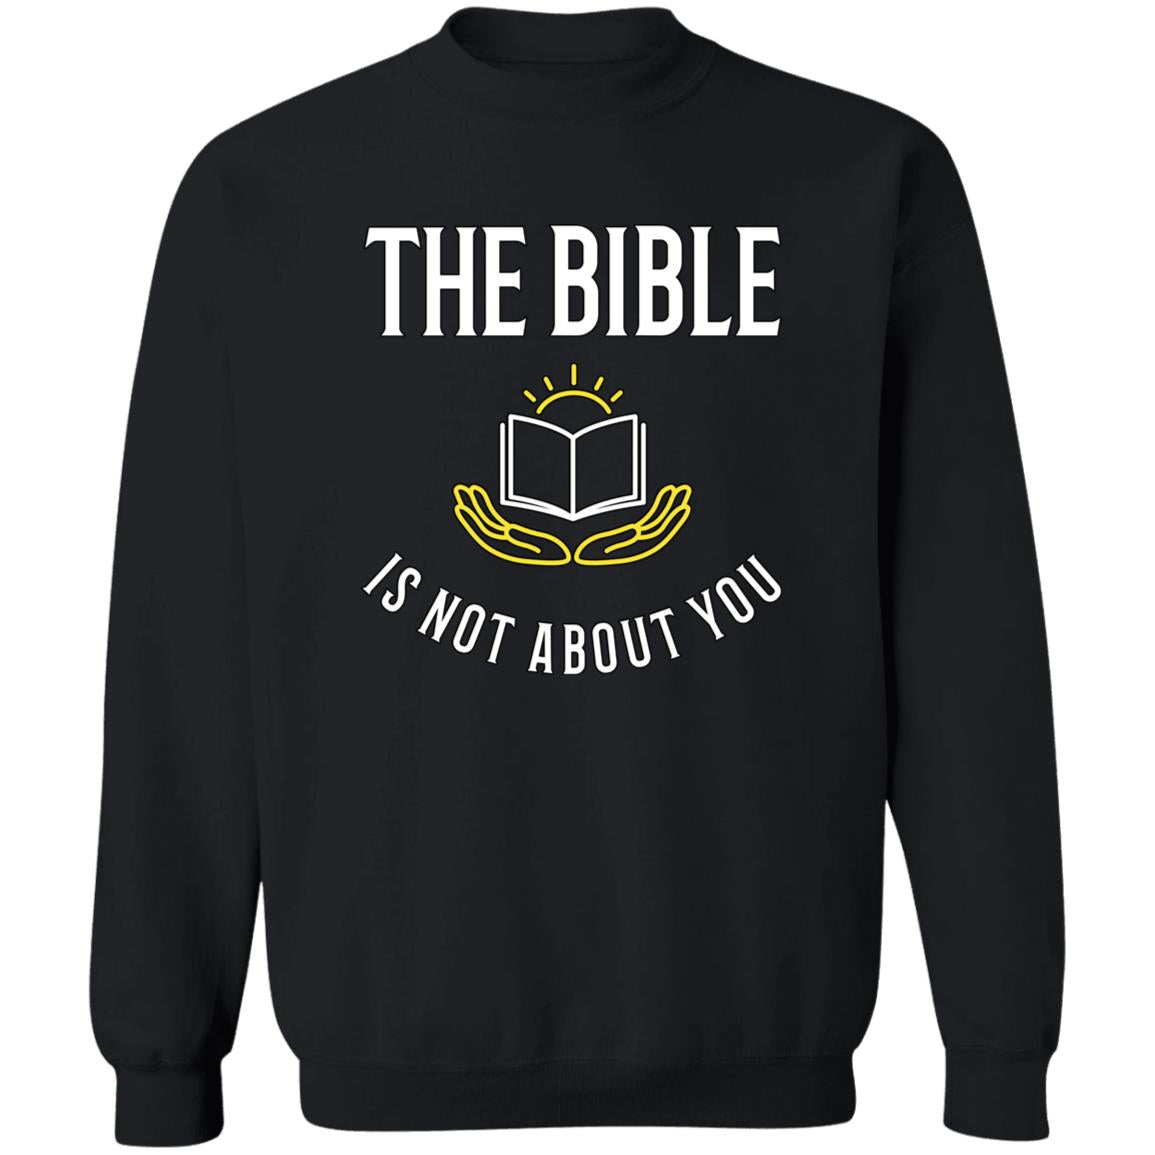 The Bible is Not About You (Unisex Sweatshirt)